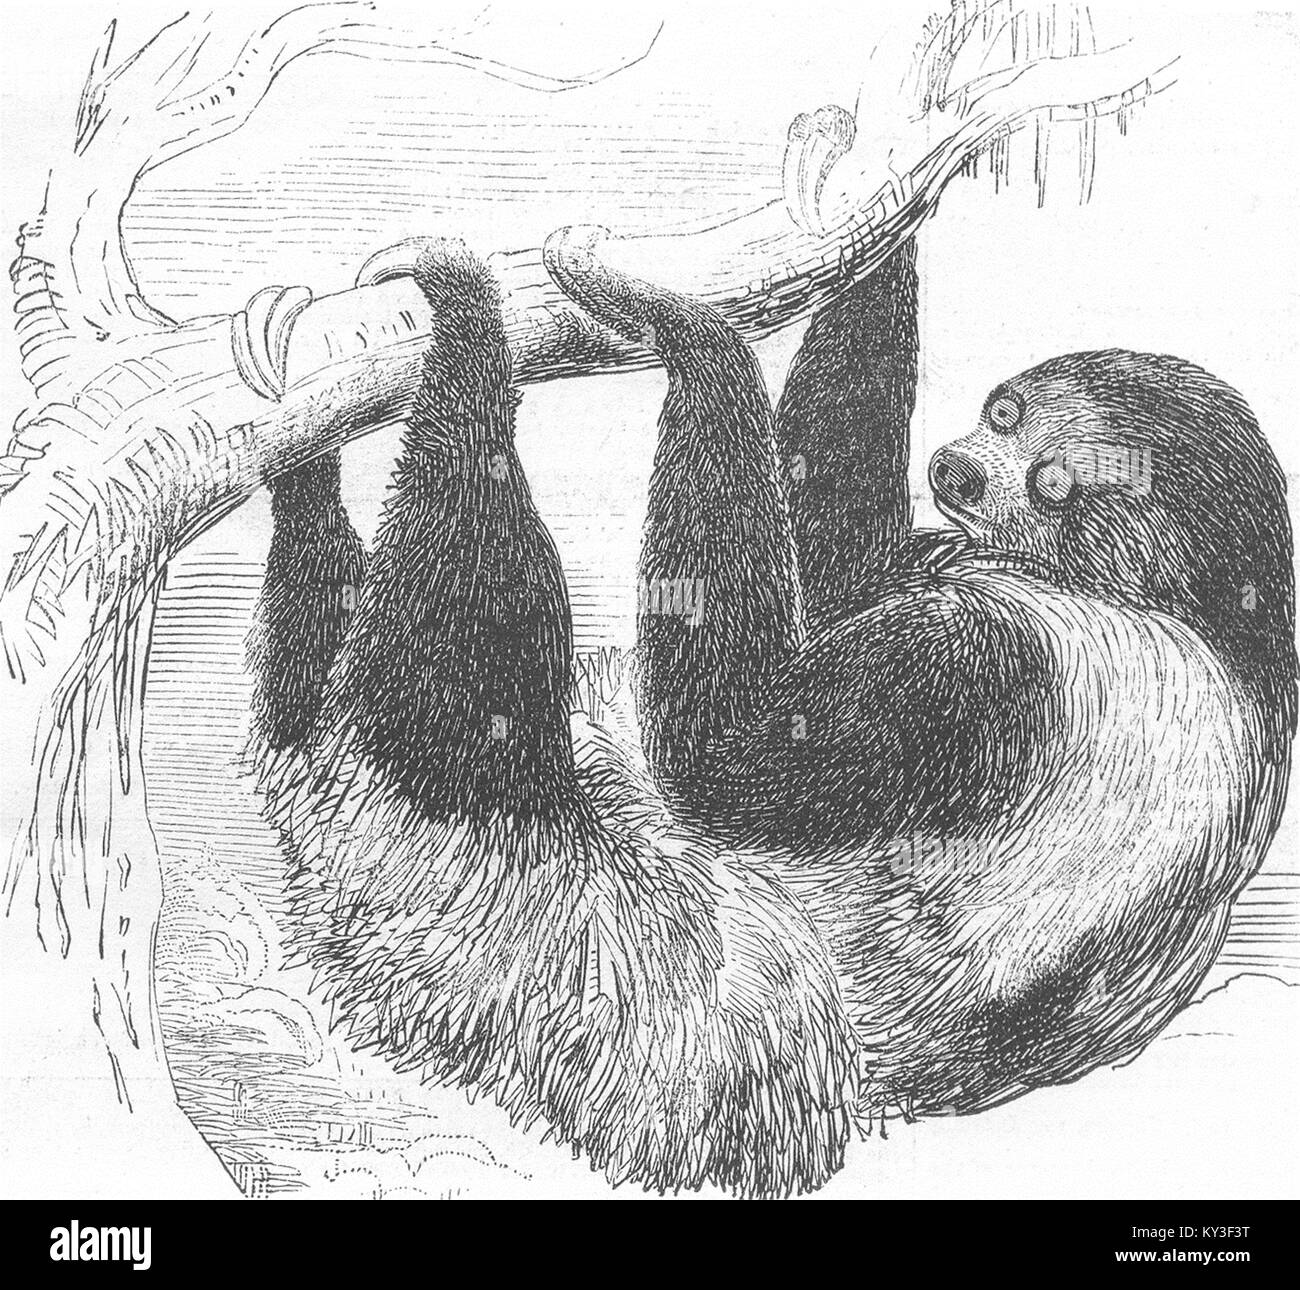 LONDON Sloth at the Zoological Gardens, Regent's Park 1844. The Illustrated London News Stock Photo